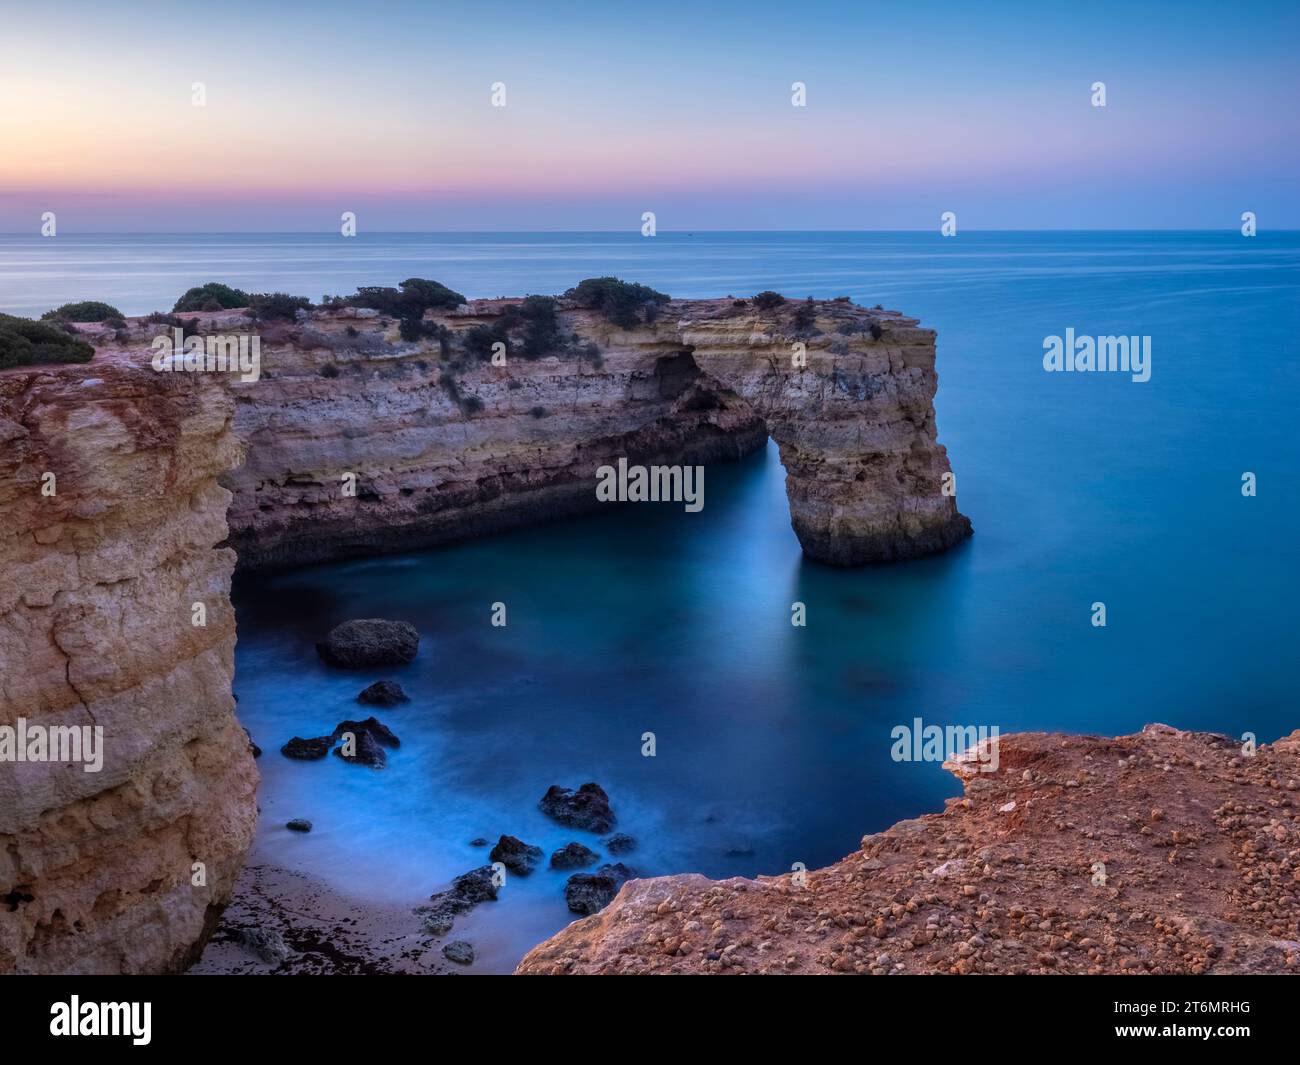 The rock arch known as Arco de Albandeira at Albandeira beach or Praia De Albandeira on the southern Algarve coast of Portugal Stock Photo